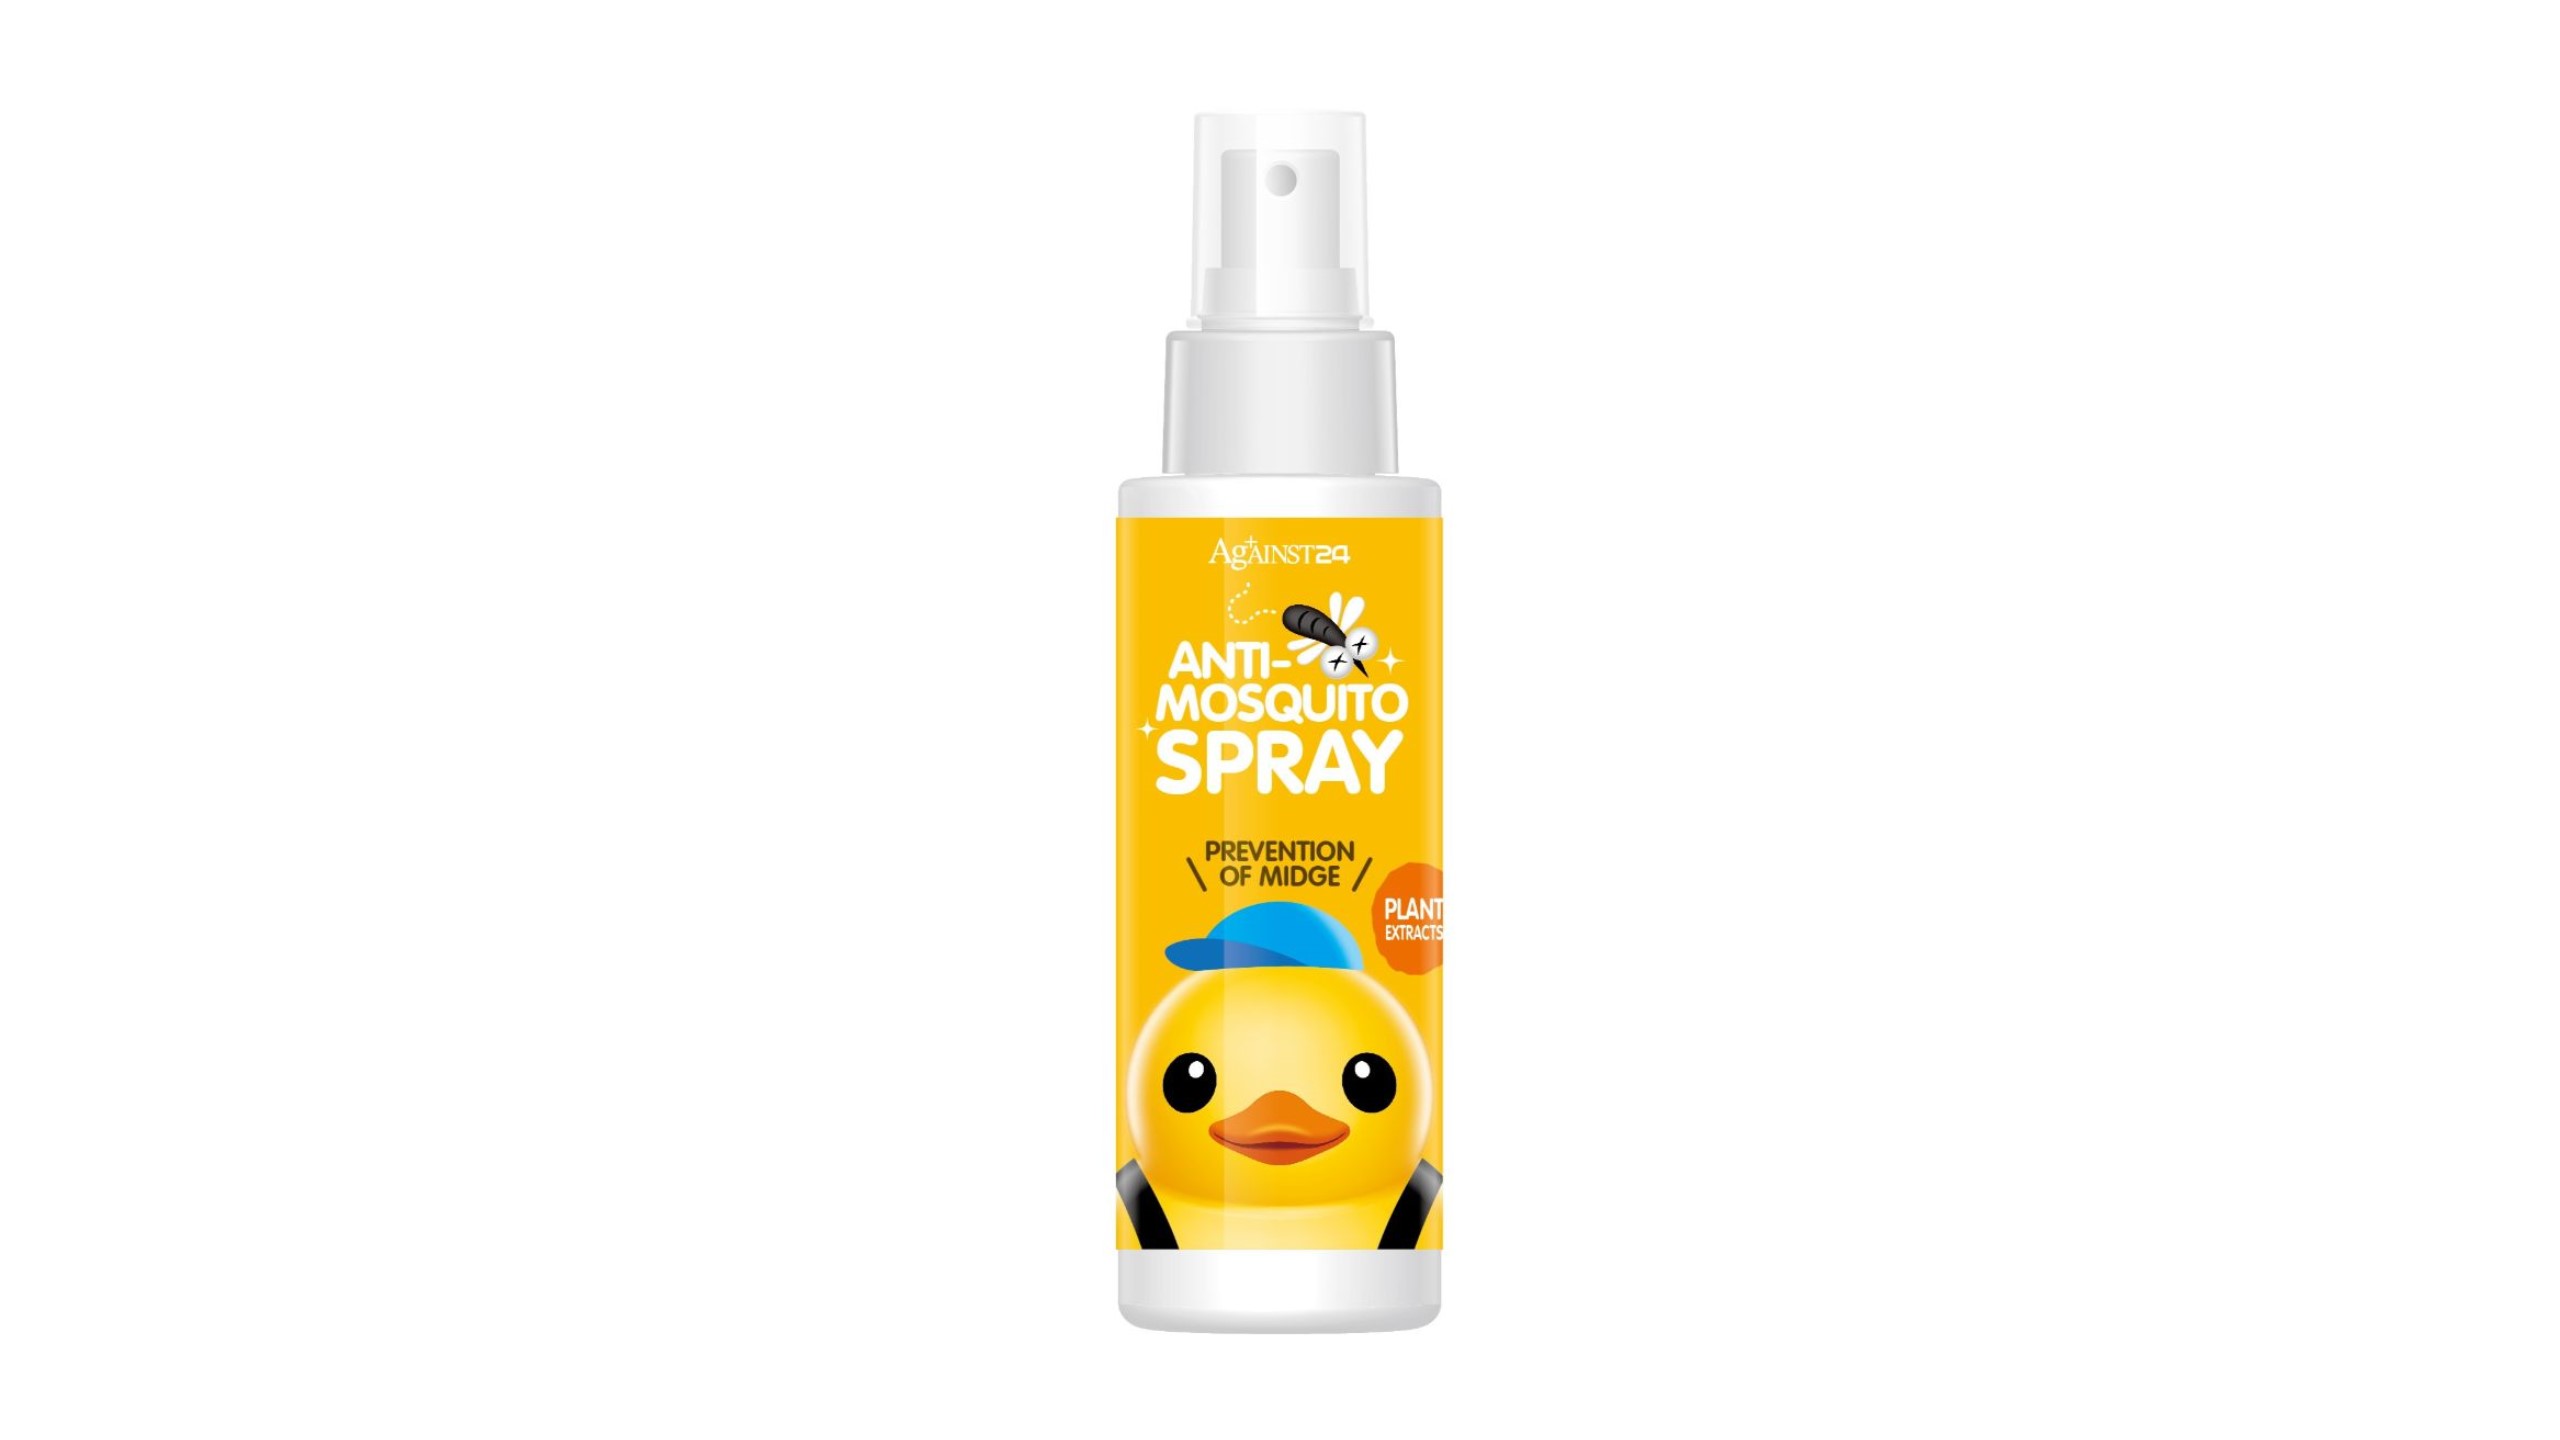 Against24 Rubber Duck Anti-Mosquito Spray 100ml